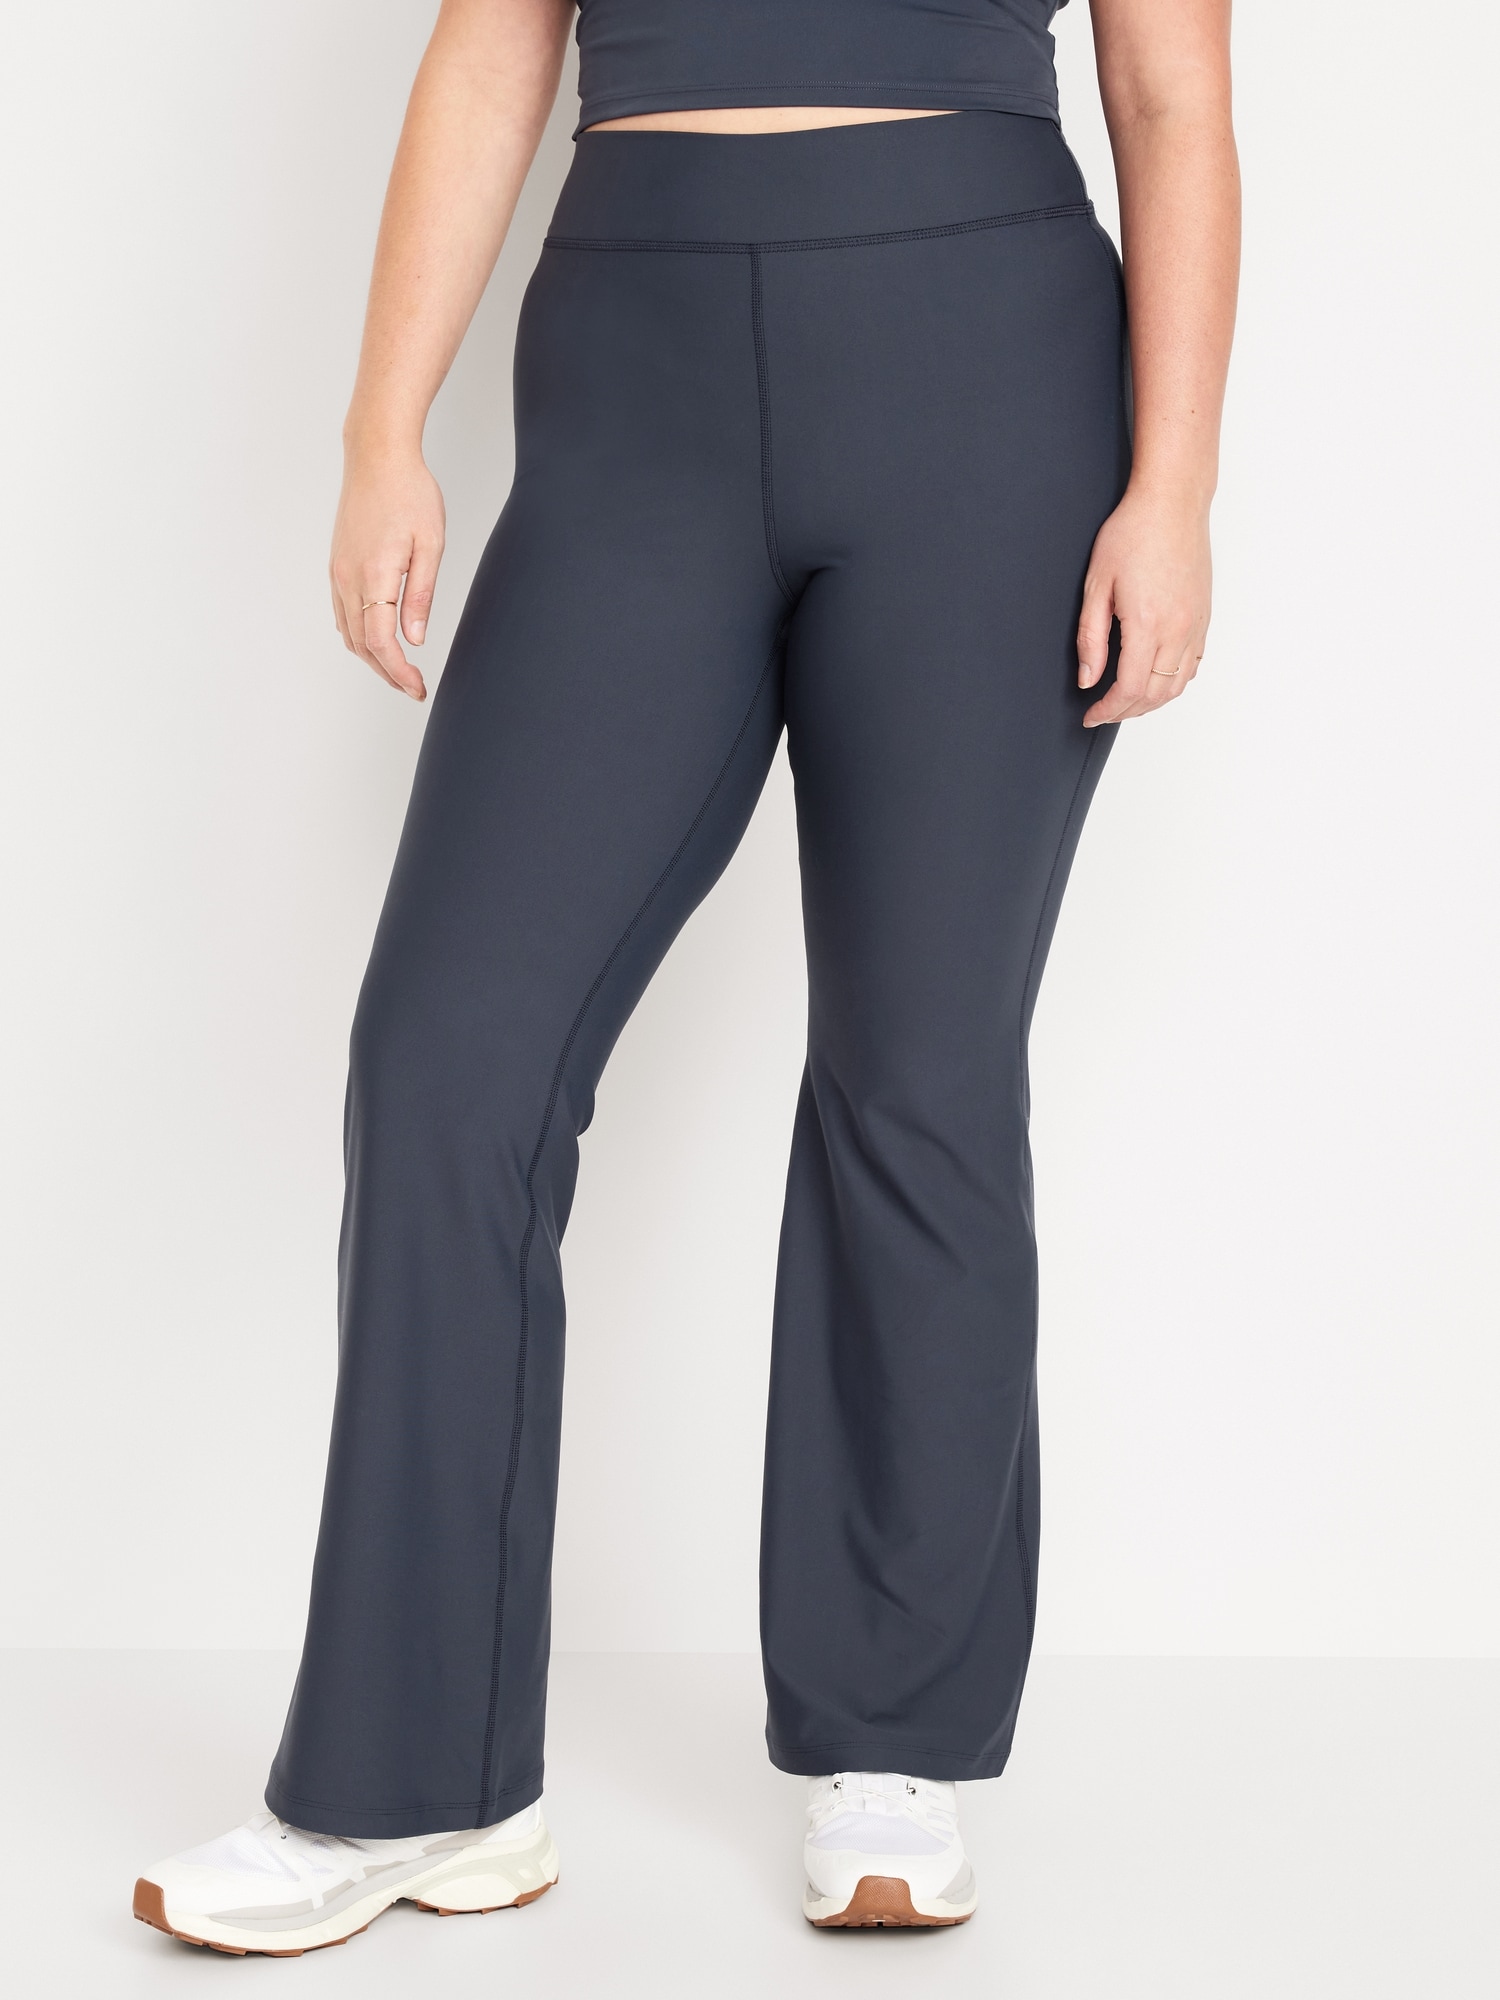 Om Hi Rise Pocket Yoga Pants by Gaiam Online, THE ICONIC